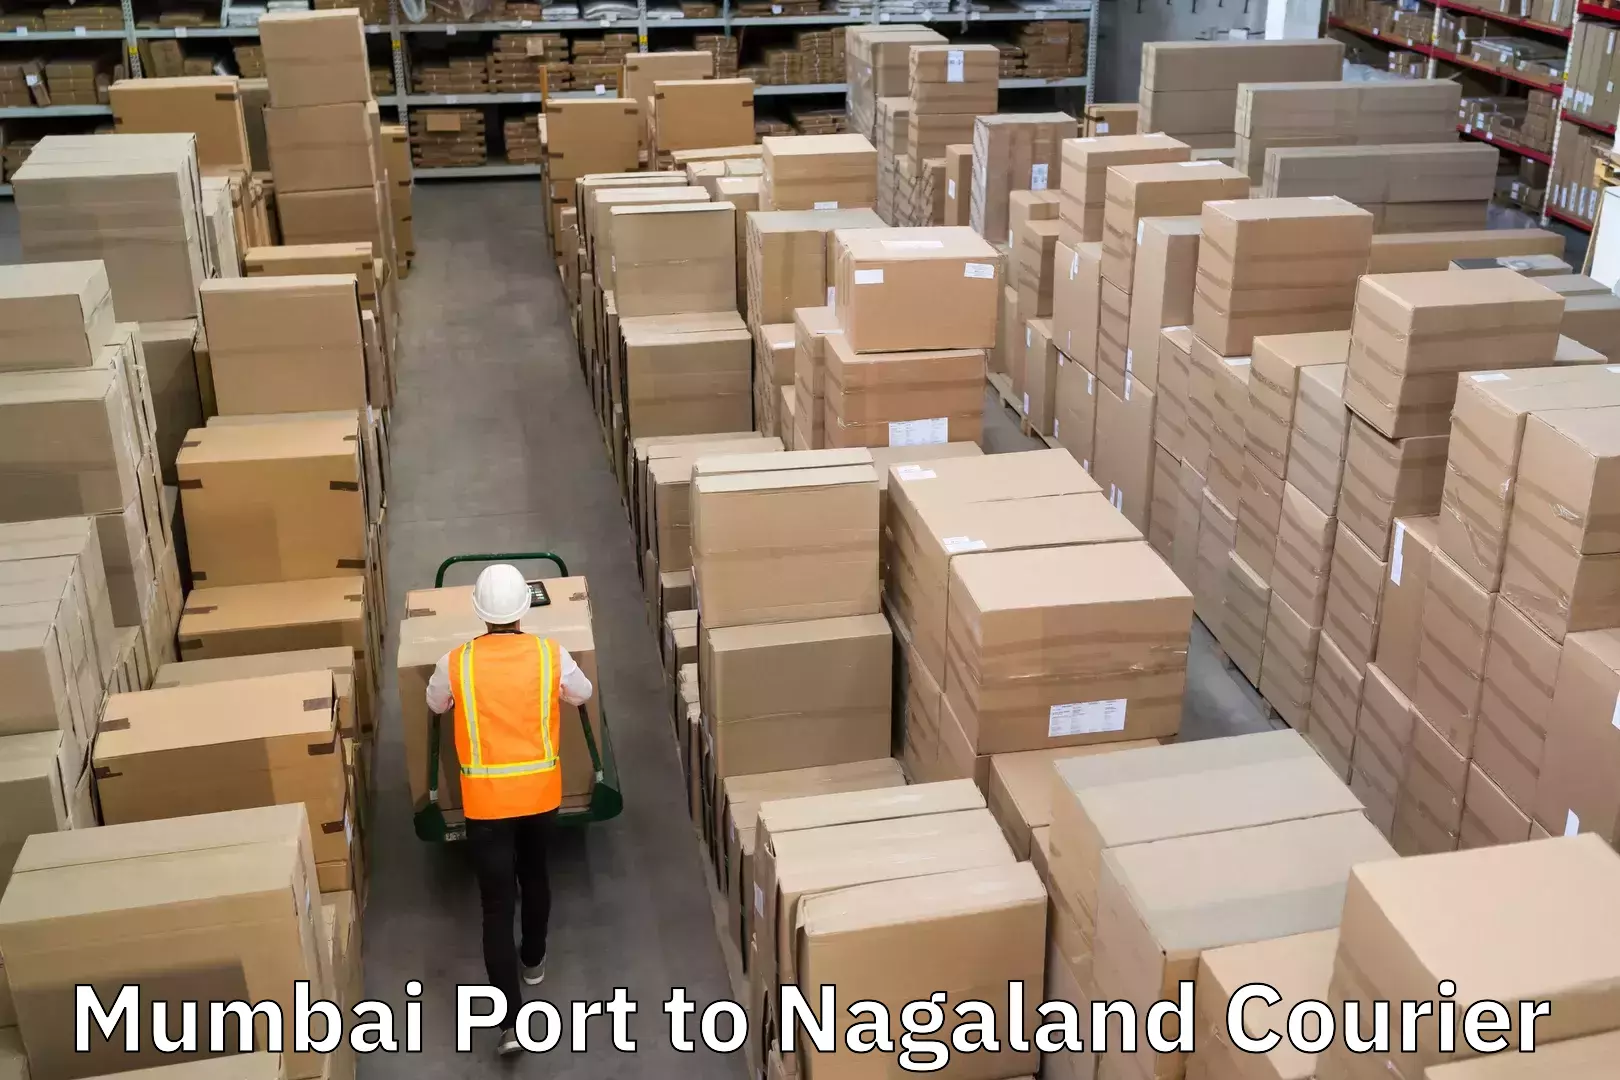 Custom courier packaging in Mumbai Port to Nagaland